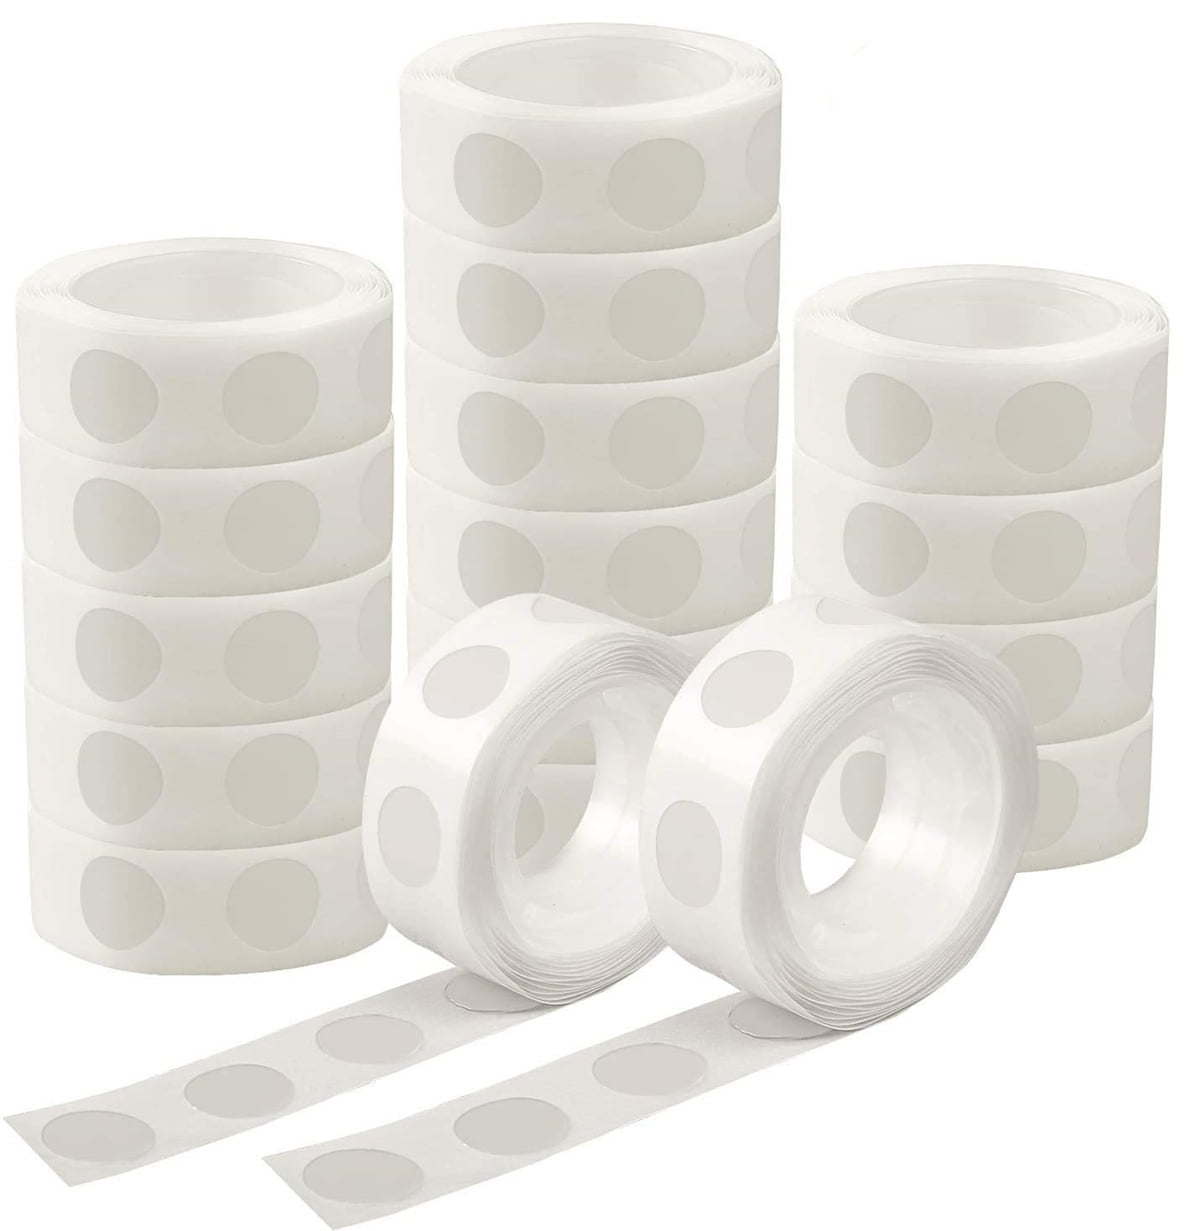 Kyweel 400 Pcs Clear Balloon Dot Glue, 4 Rolls of Removable Double Sided Tape for Balloon Party or Birthday Decorations